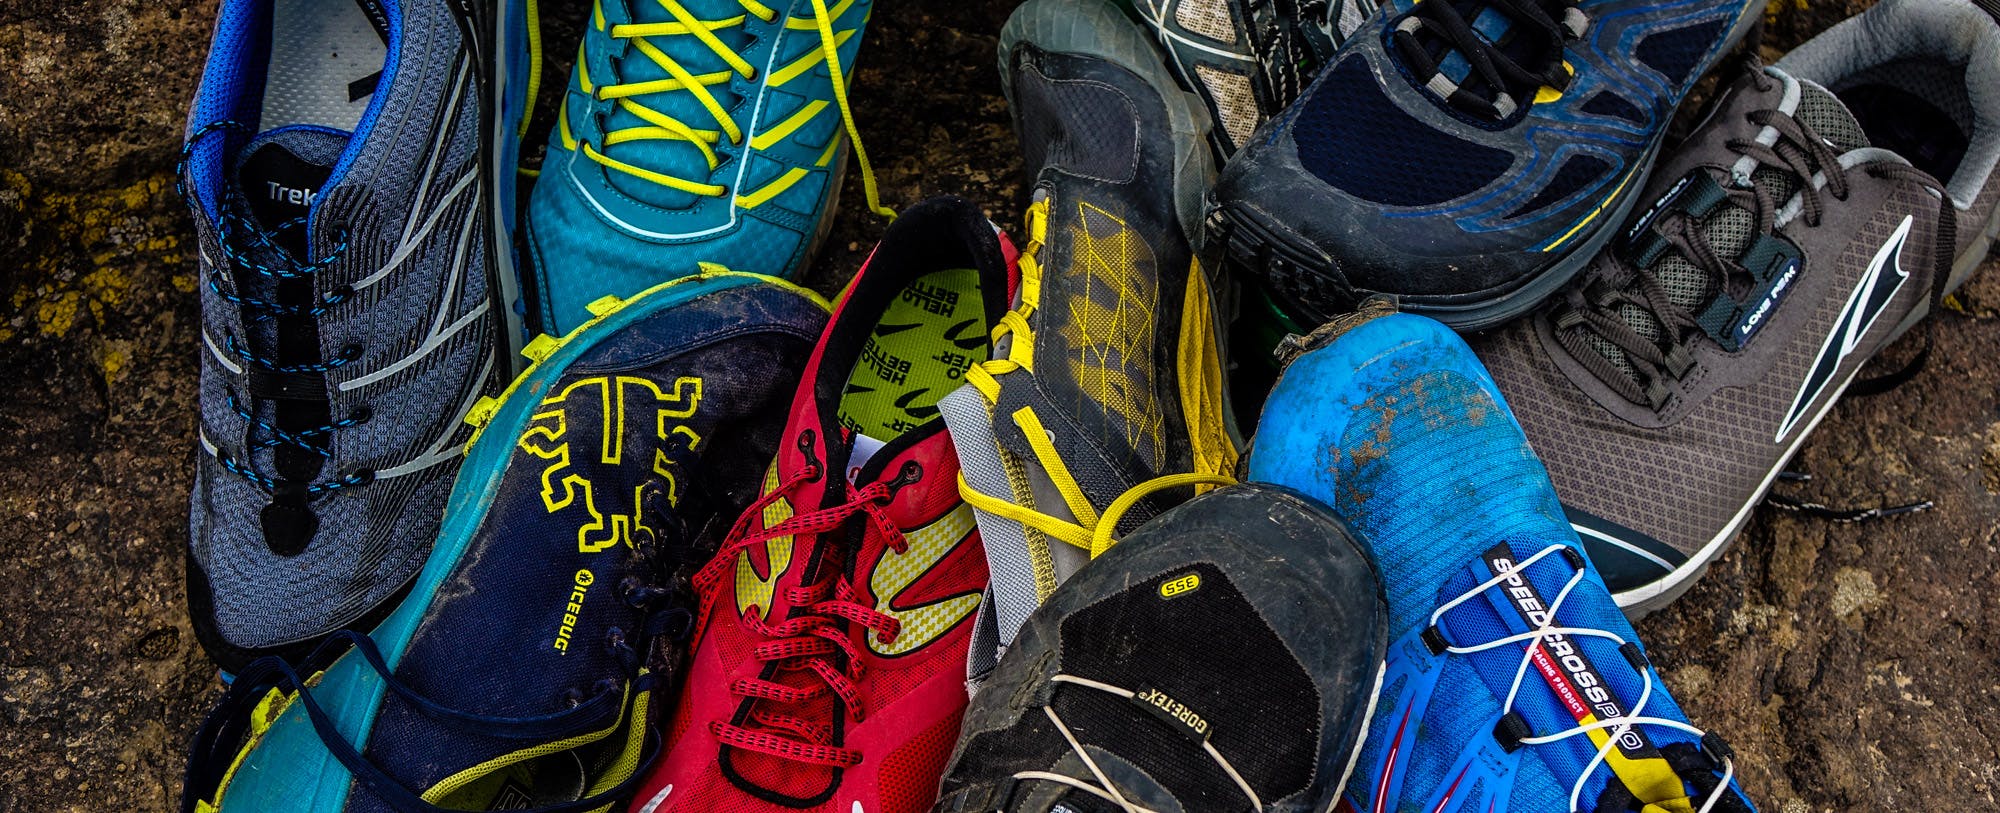 The Best Trail Running Shoes for Men and Women